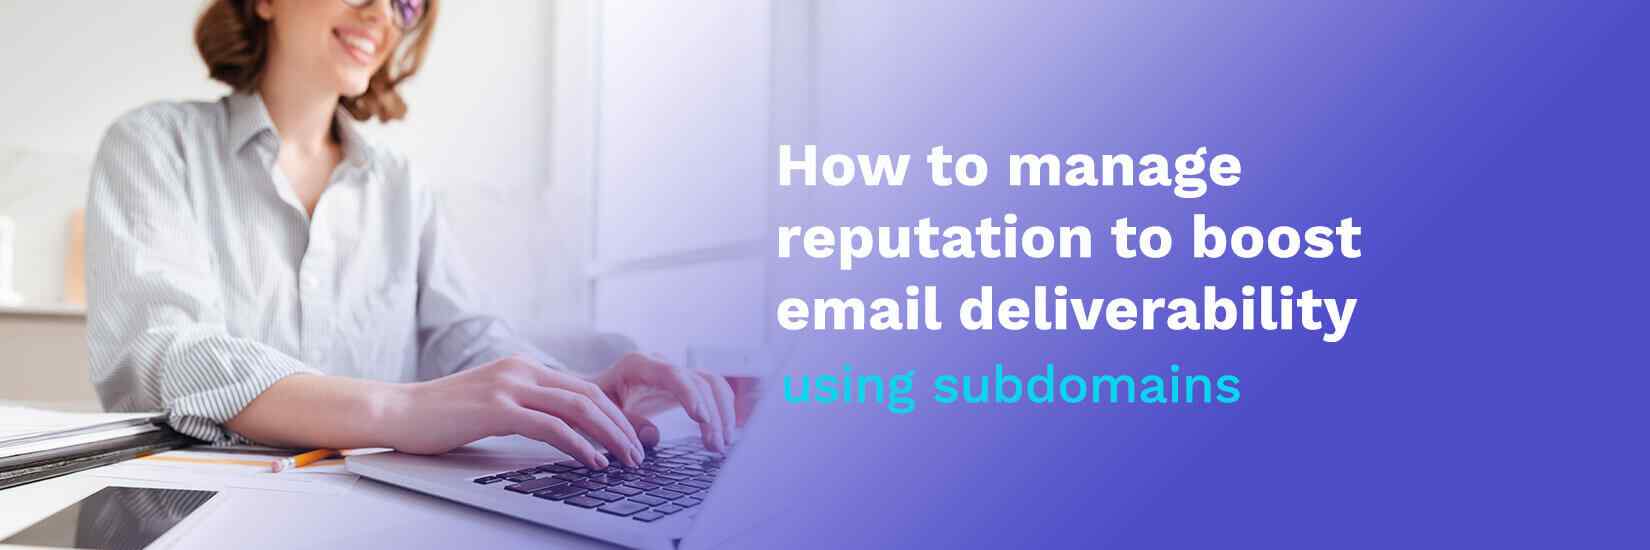 Manage Sender Reputation & Boost Email Deliverability With Subdomains